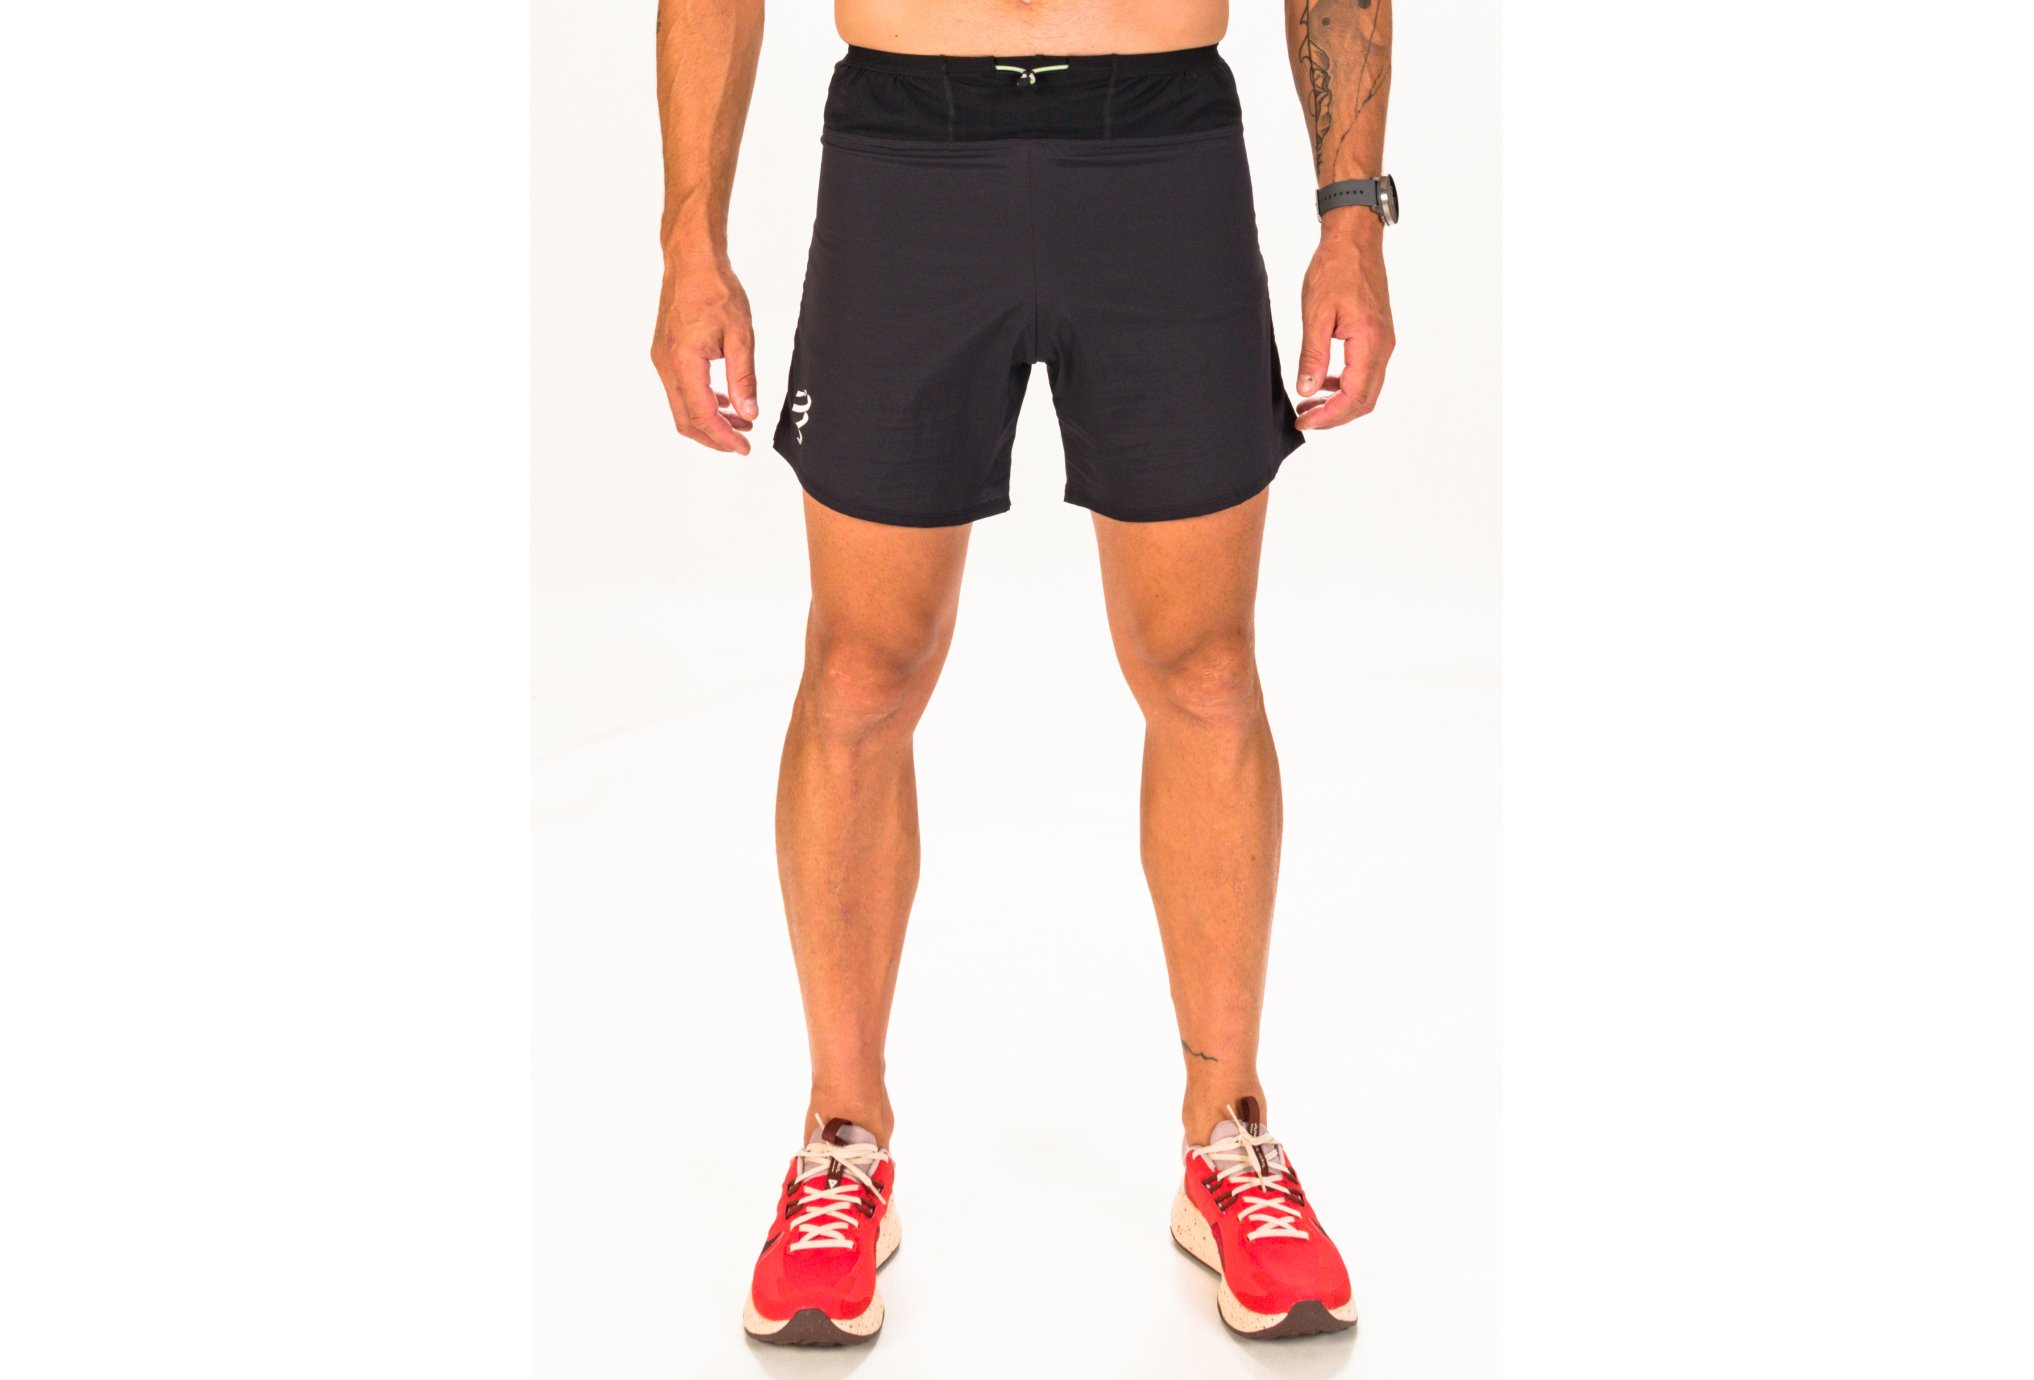 Compressport Trail Racing M homme pas cher